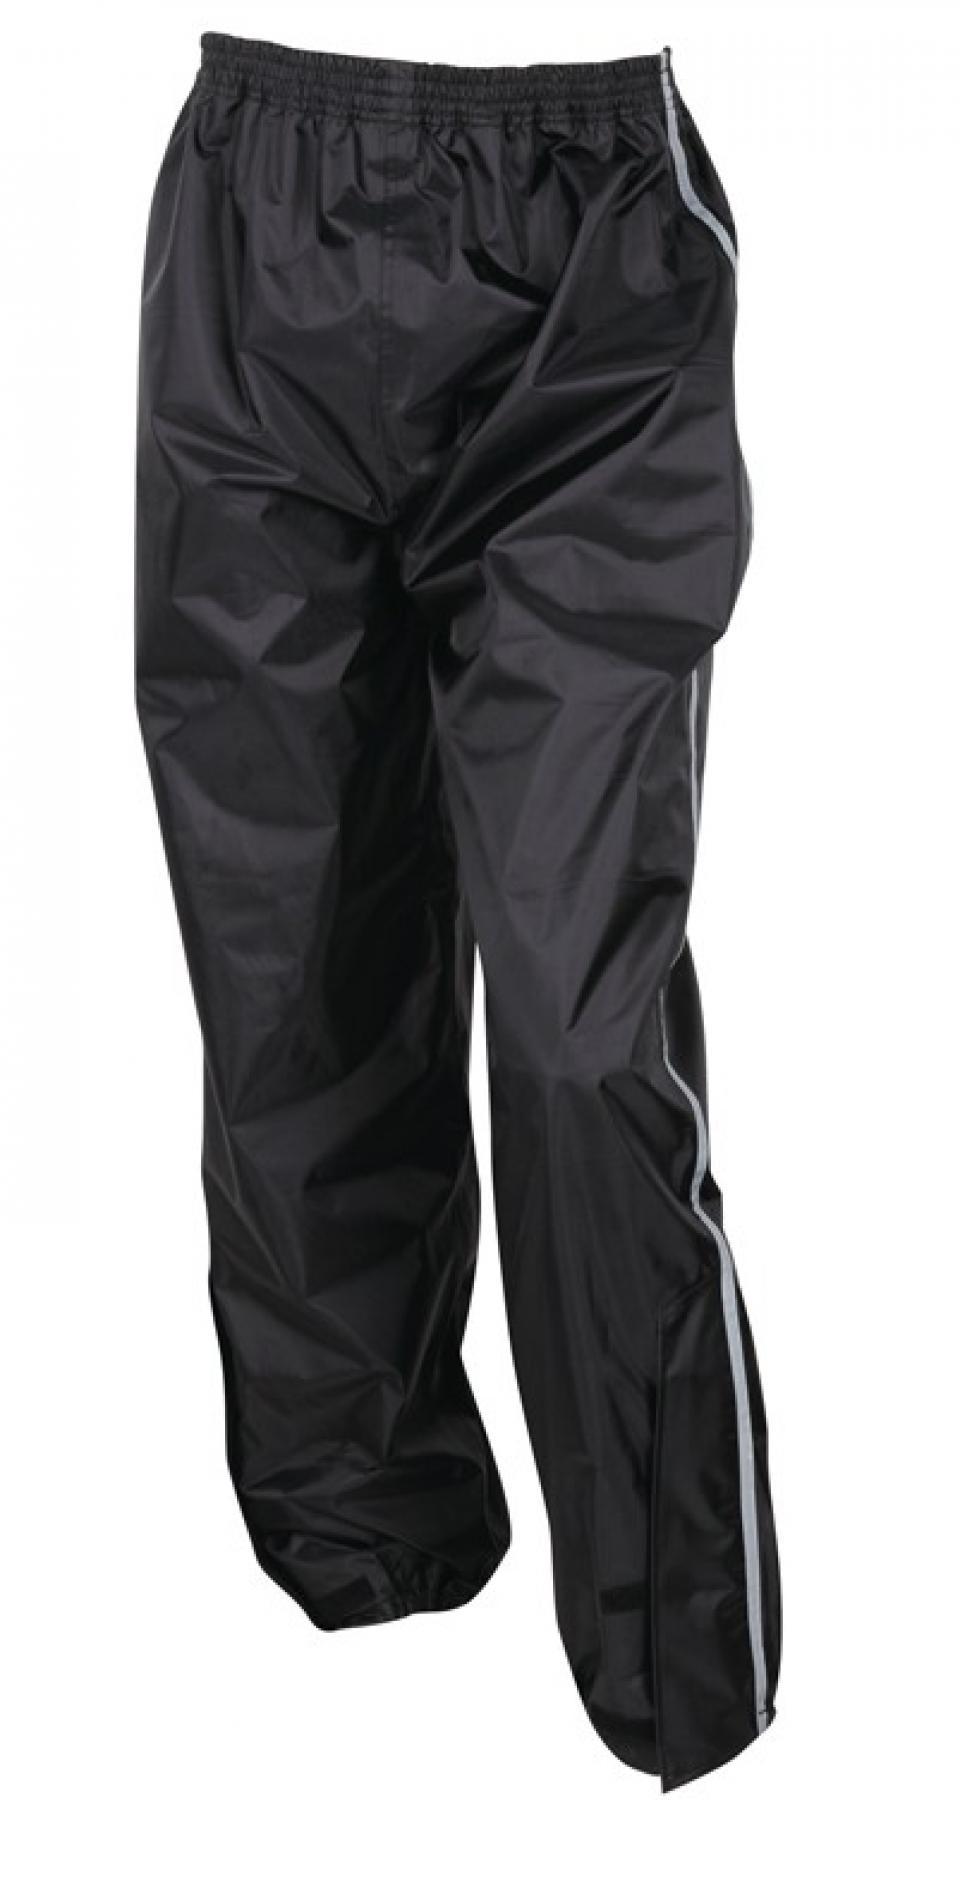 Pantalon pour moto route Mad Homme / Femme MAD Taille XS Neuf